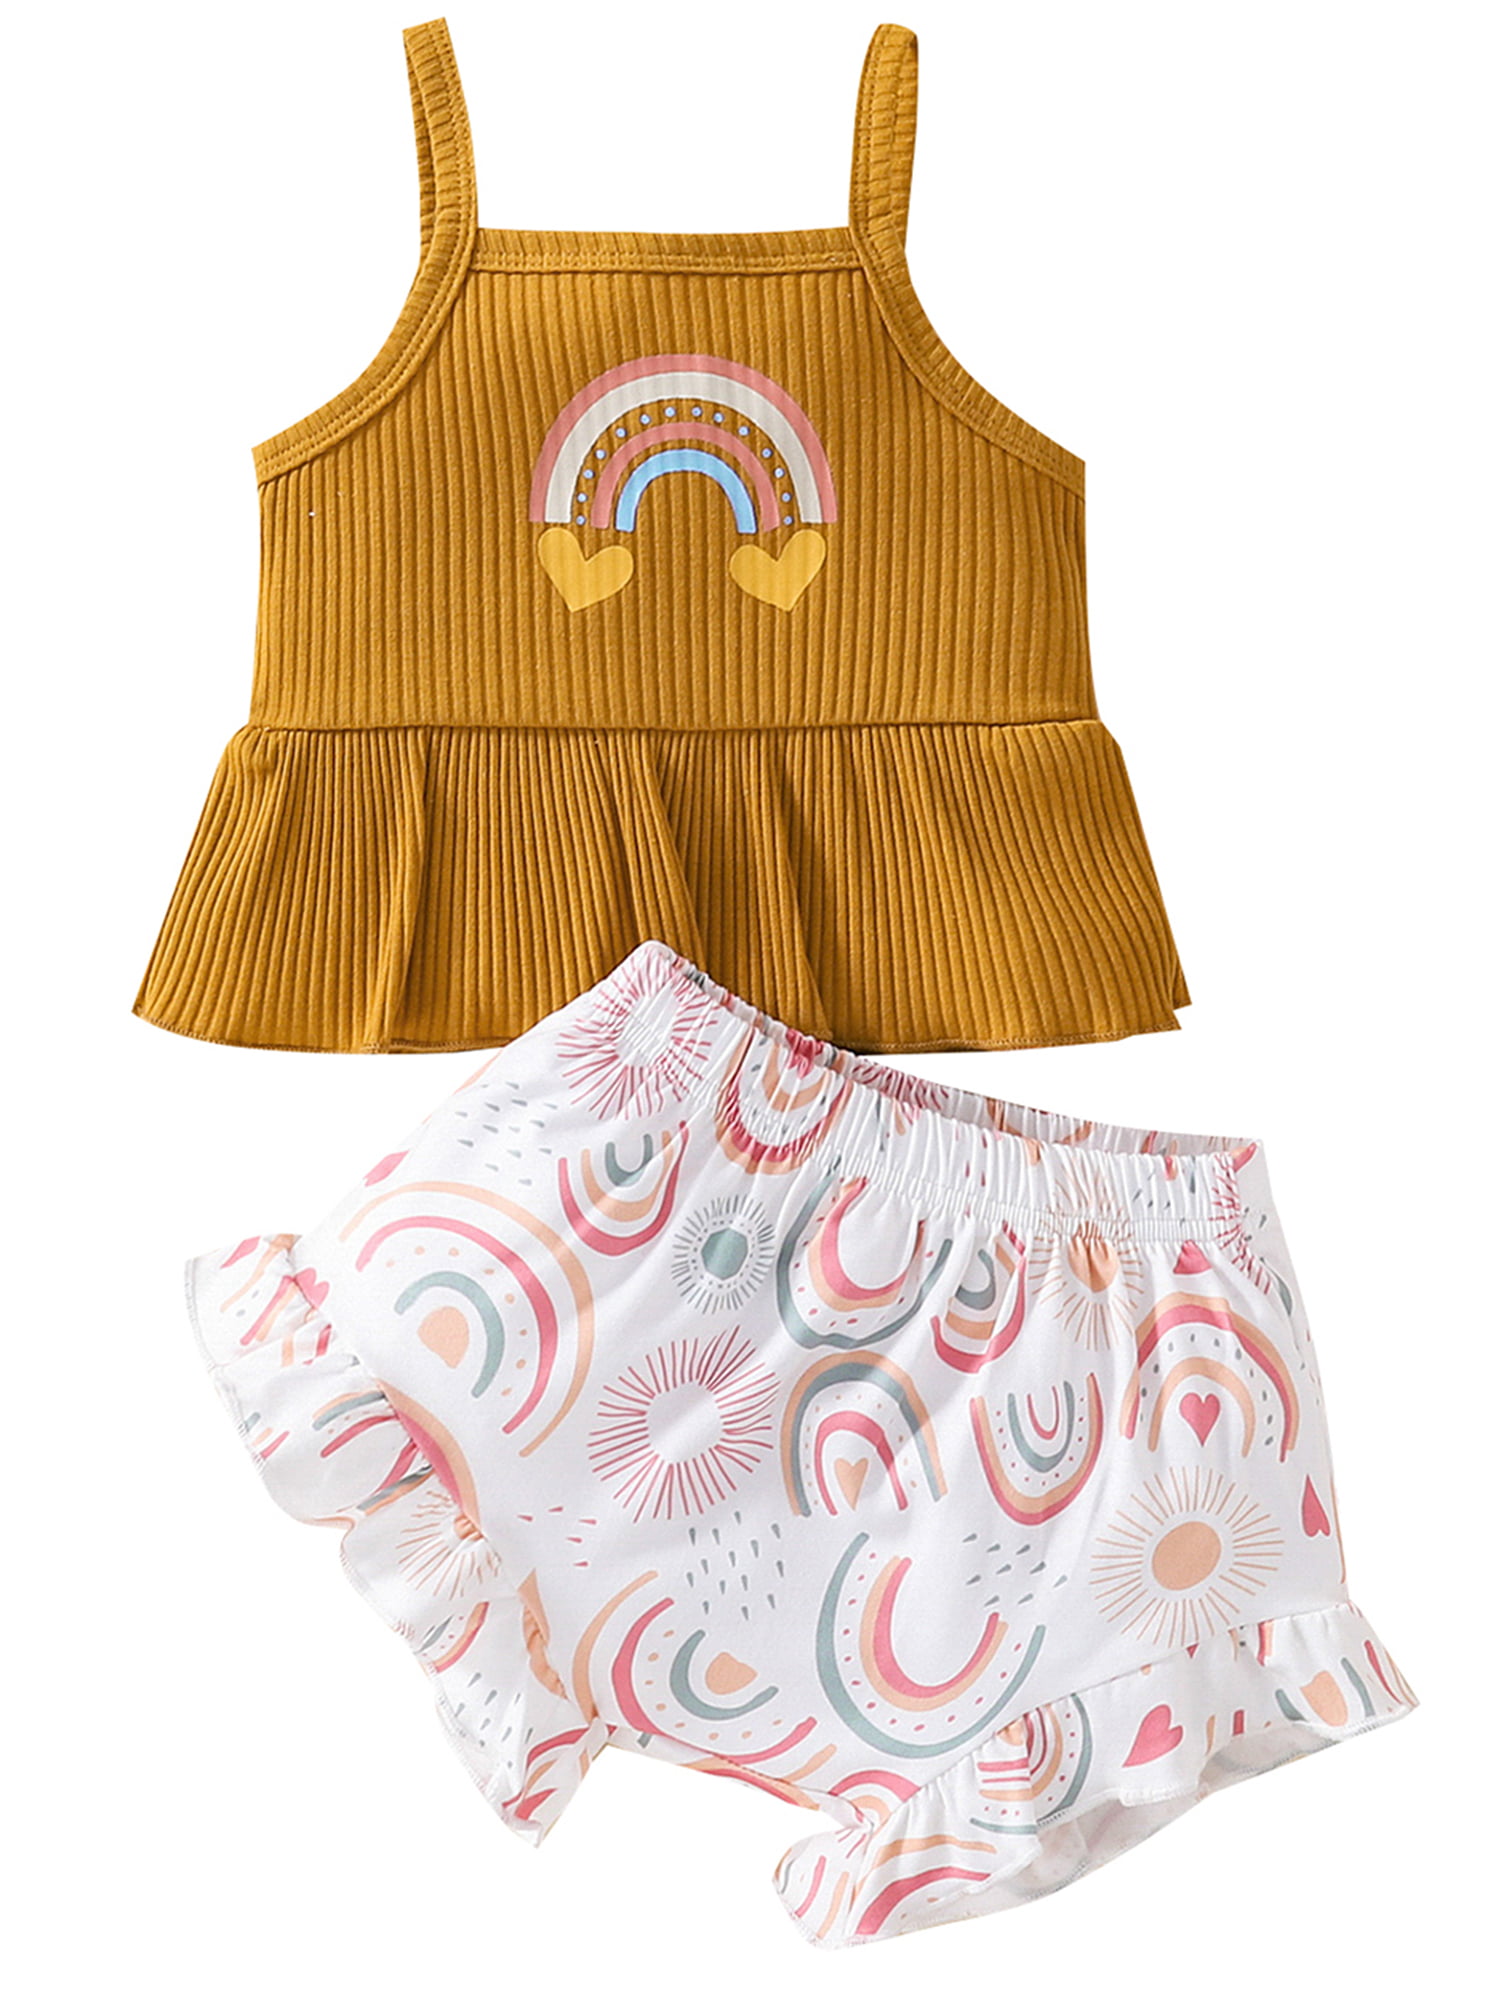 Toddler Baby Girl Outfits Solid Crop Top Halter Vest Button Tank Top Heart Print Shorts Set 2Pcs Summer Clothes Set 